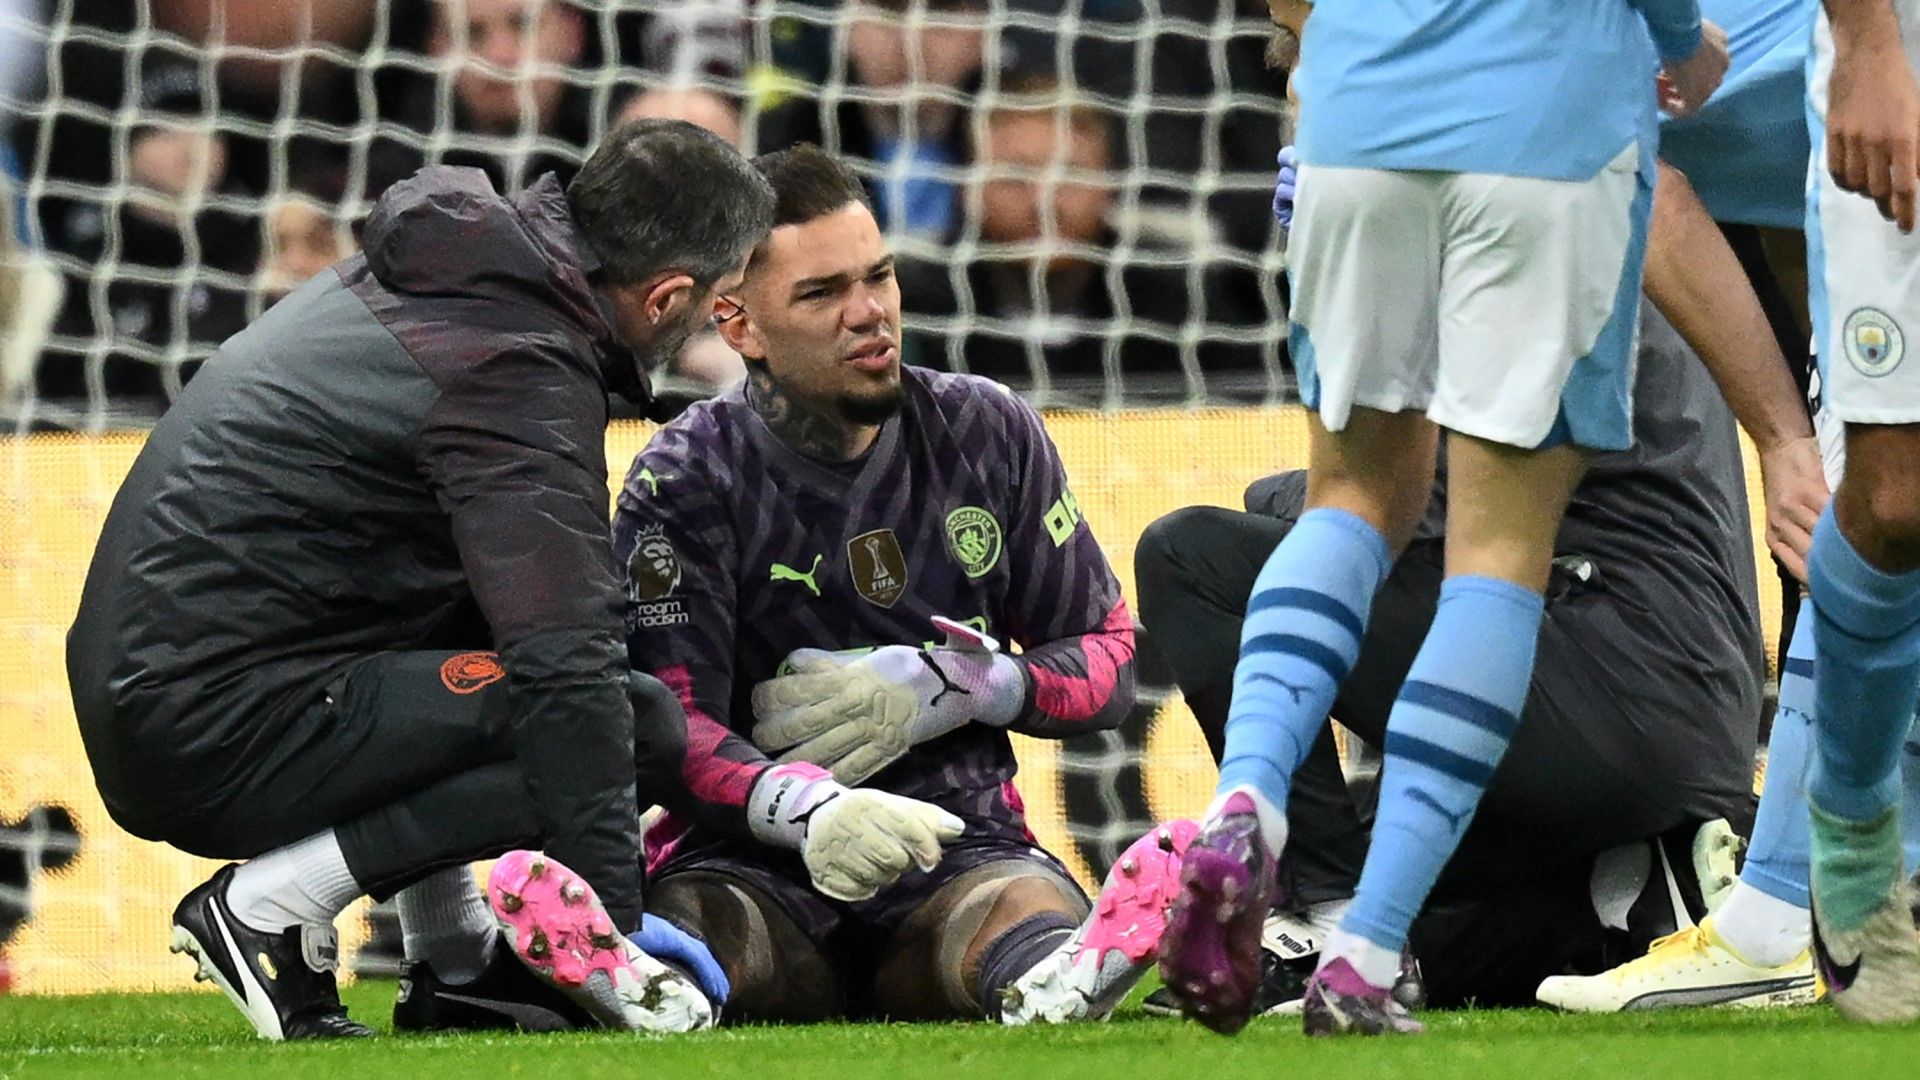 Absolute f*cking joke!' - Man City left raging AGAIN as Ederson forced off injured - days after John Stones suffered same fate - due to 'stupid' offside law | Goal.com UK